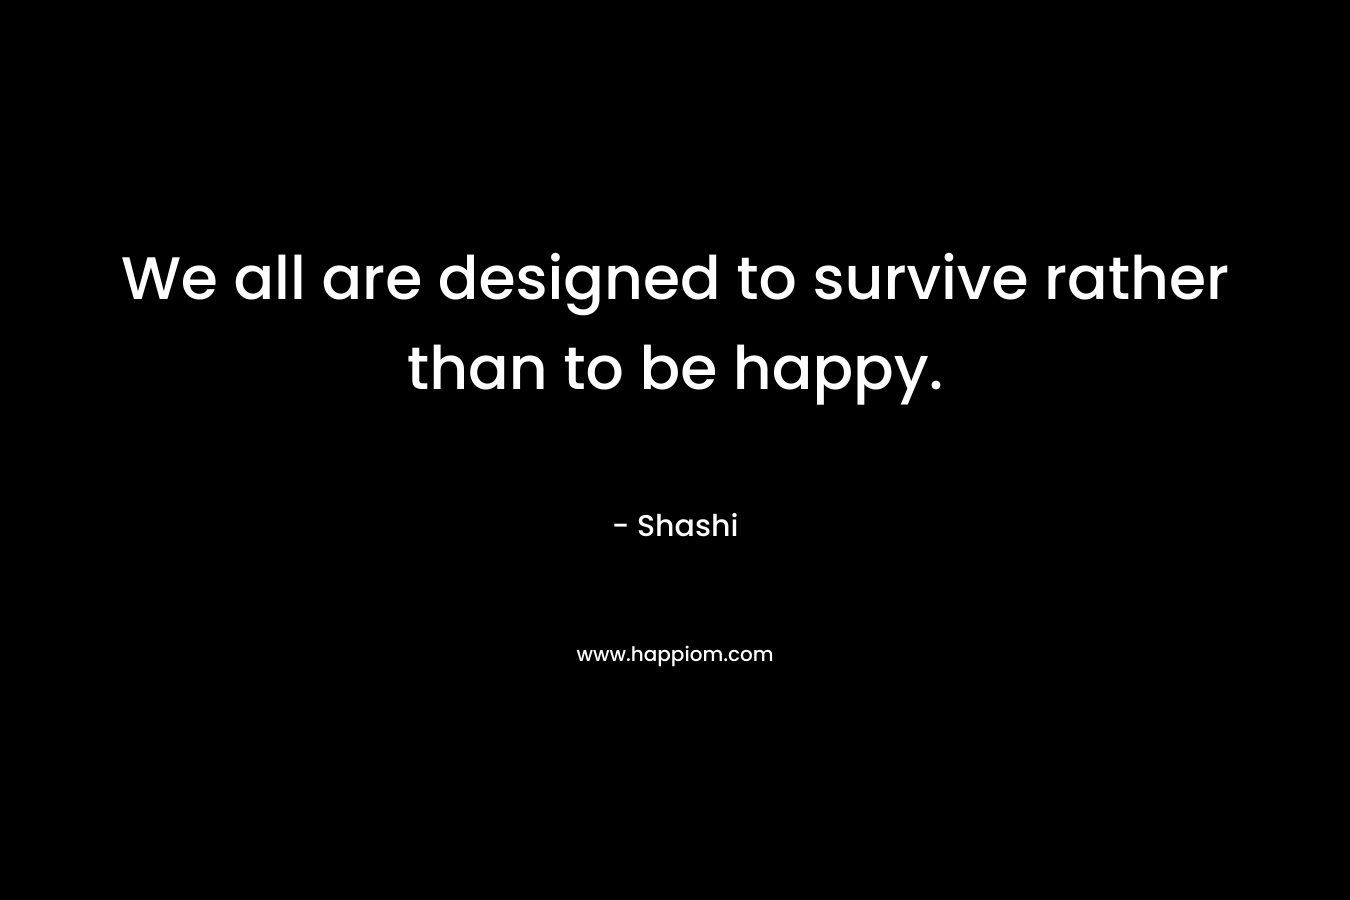 We all are designed to survive rather than to be happy. – Shashi